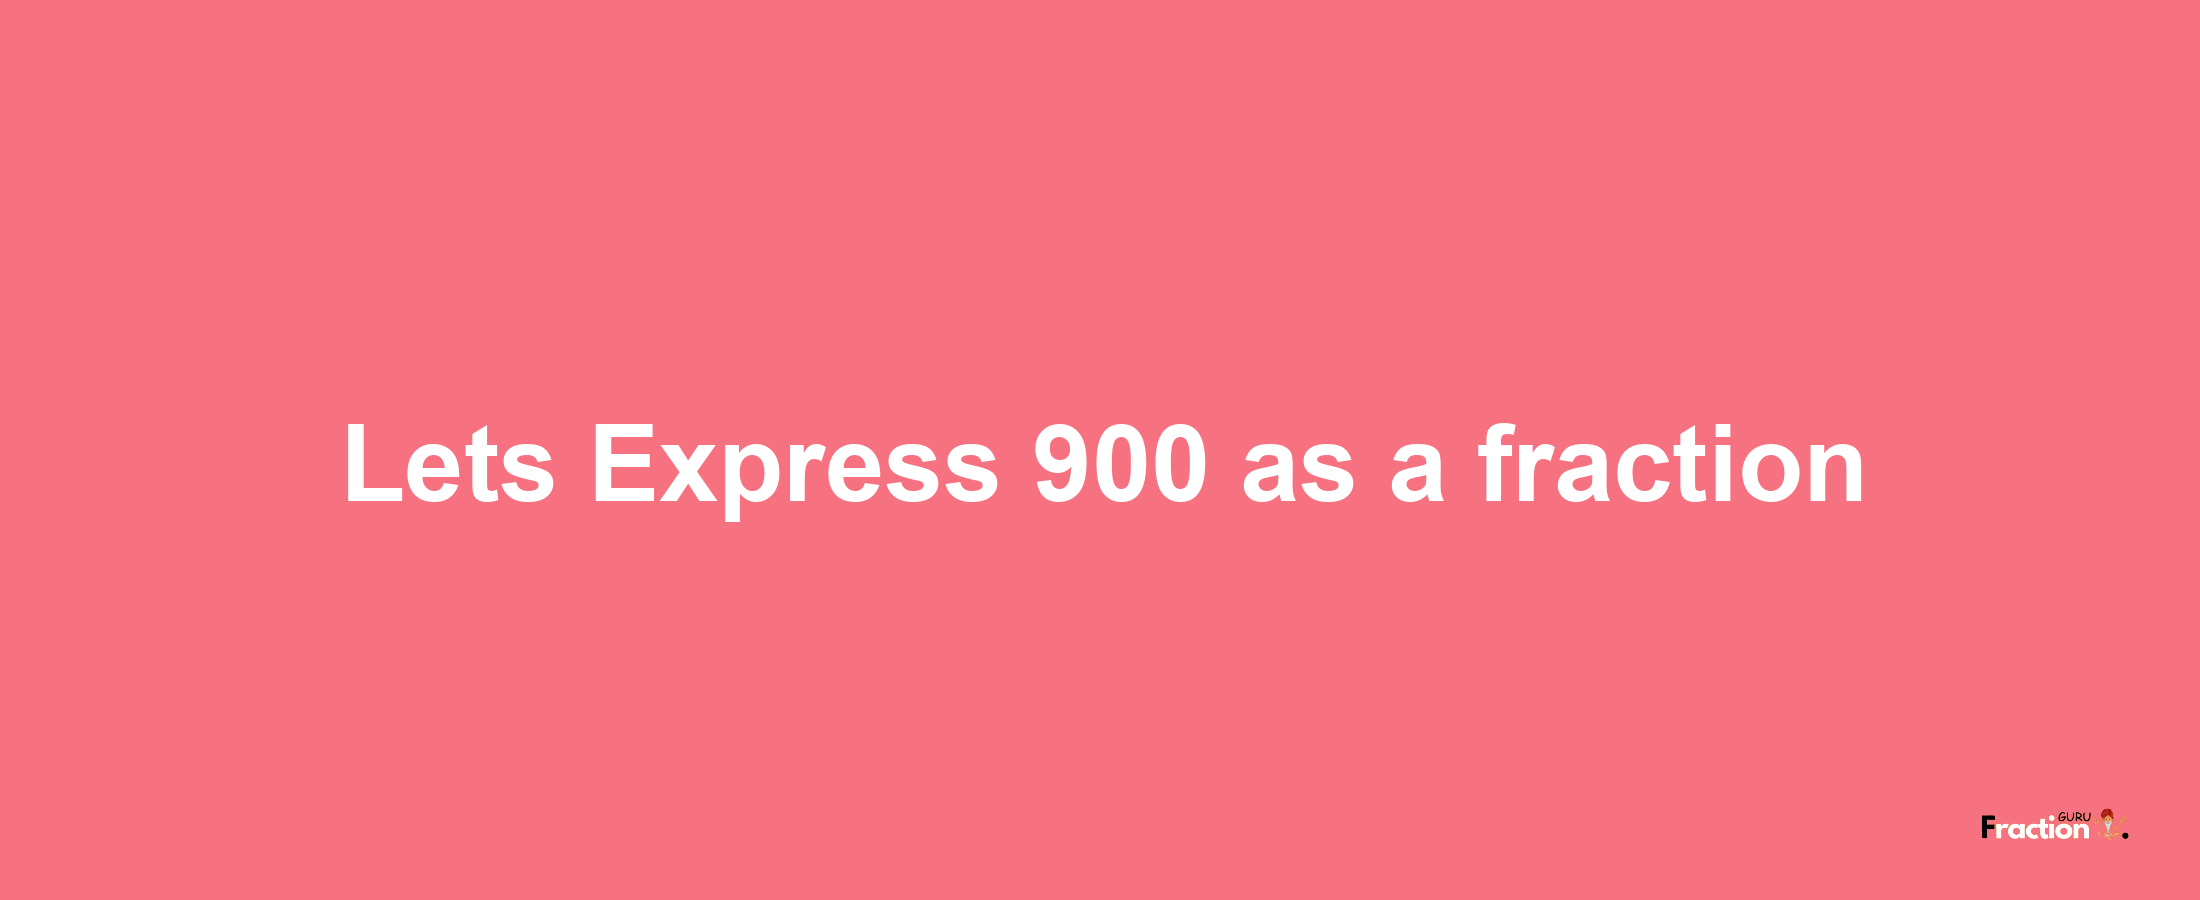 Lets Express 900 as afraction